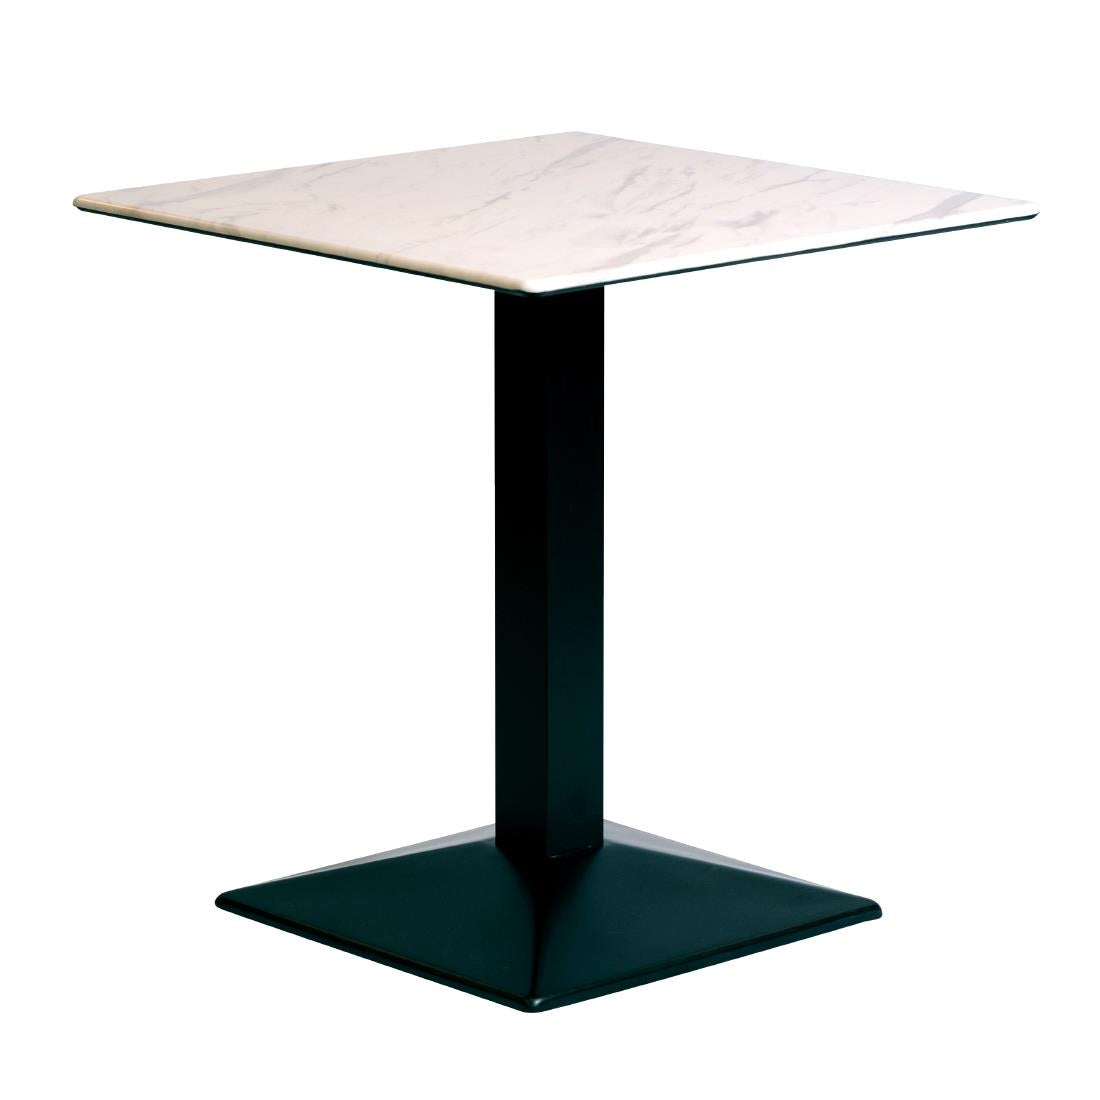 CZ810 Turin Metal Base Square Dining Table with Laminate Top Marble 600mm JD Catering Equipment Solutions Ltd